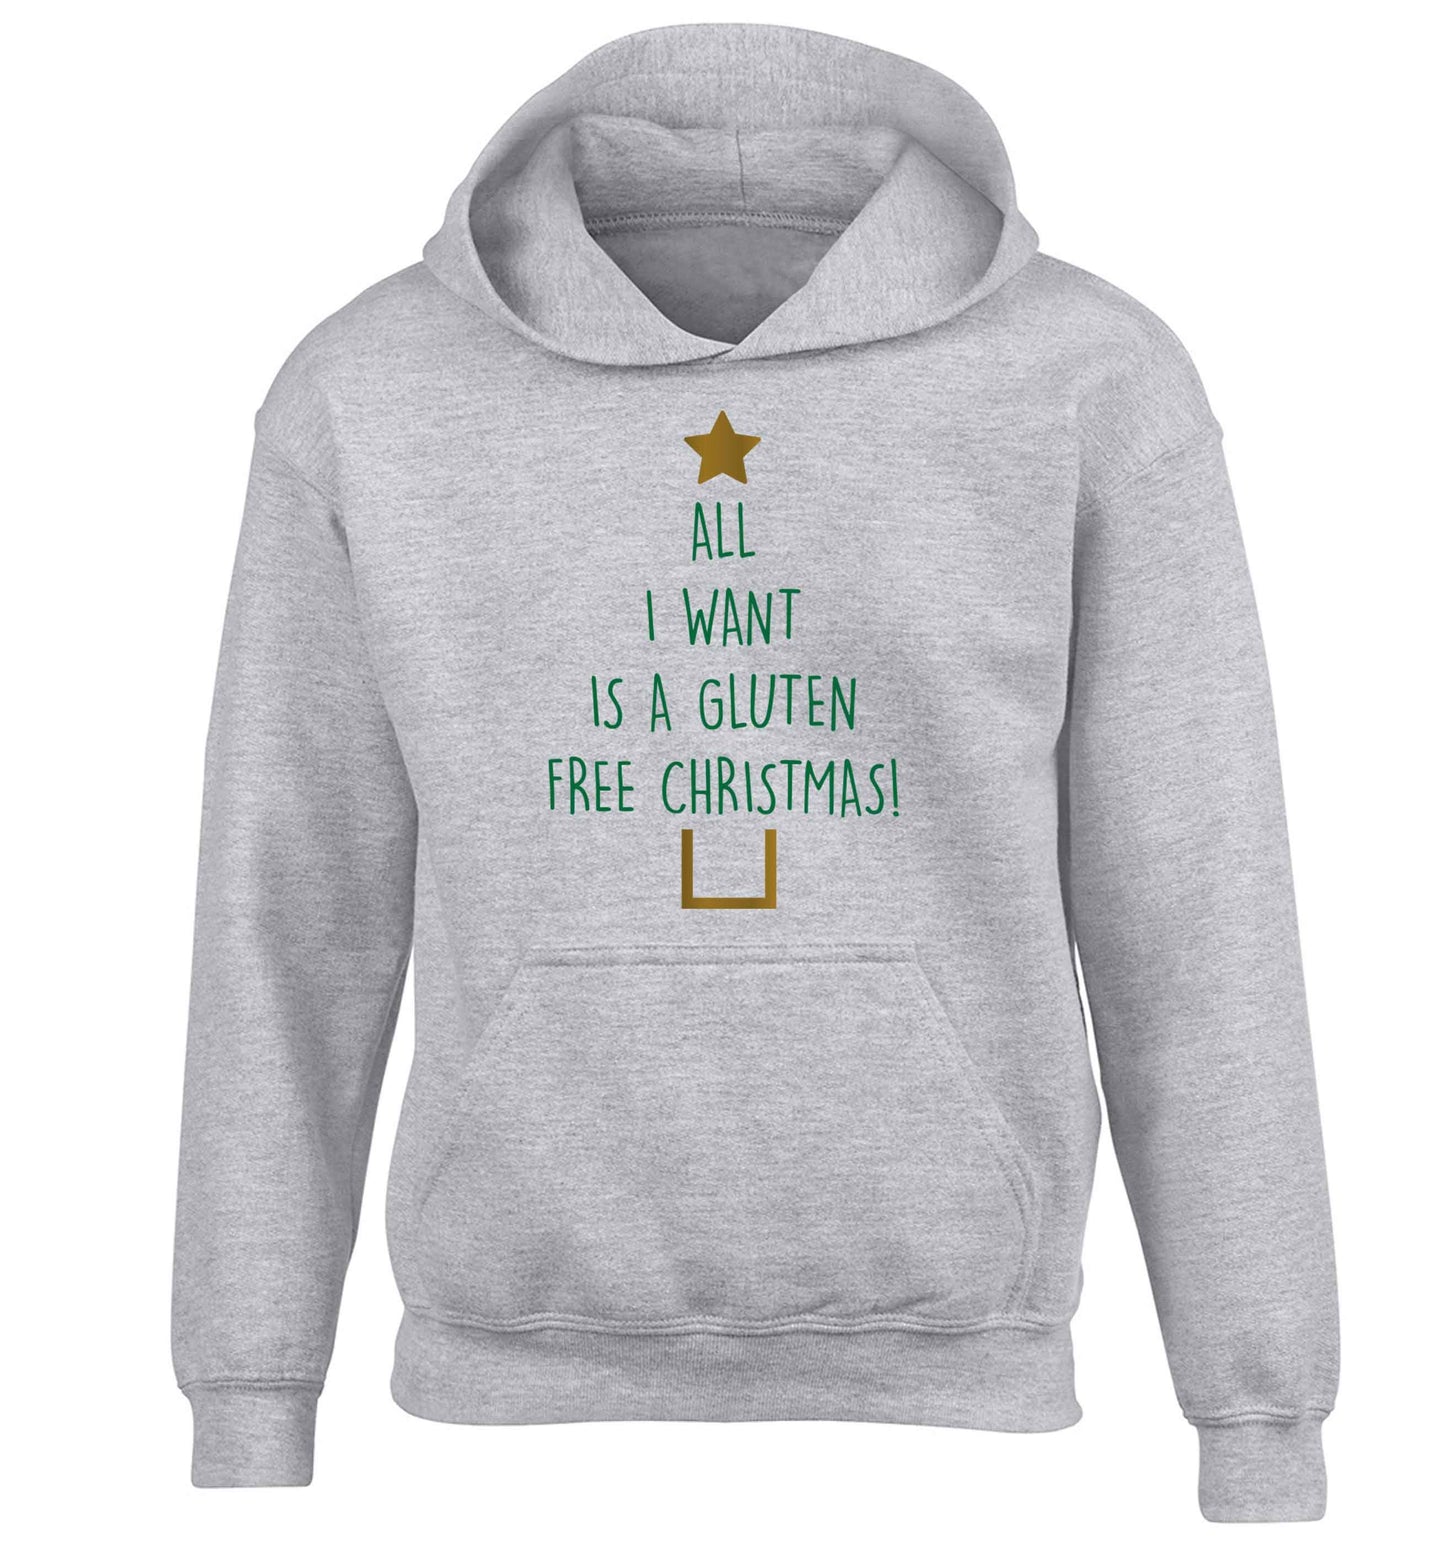 All I want is a gluten free Christmas children's grey hoodie 12-13 Years